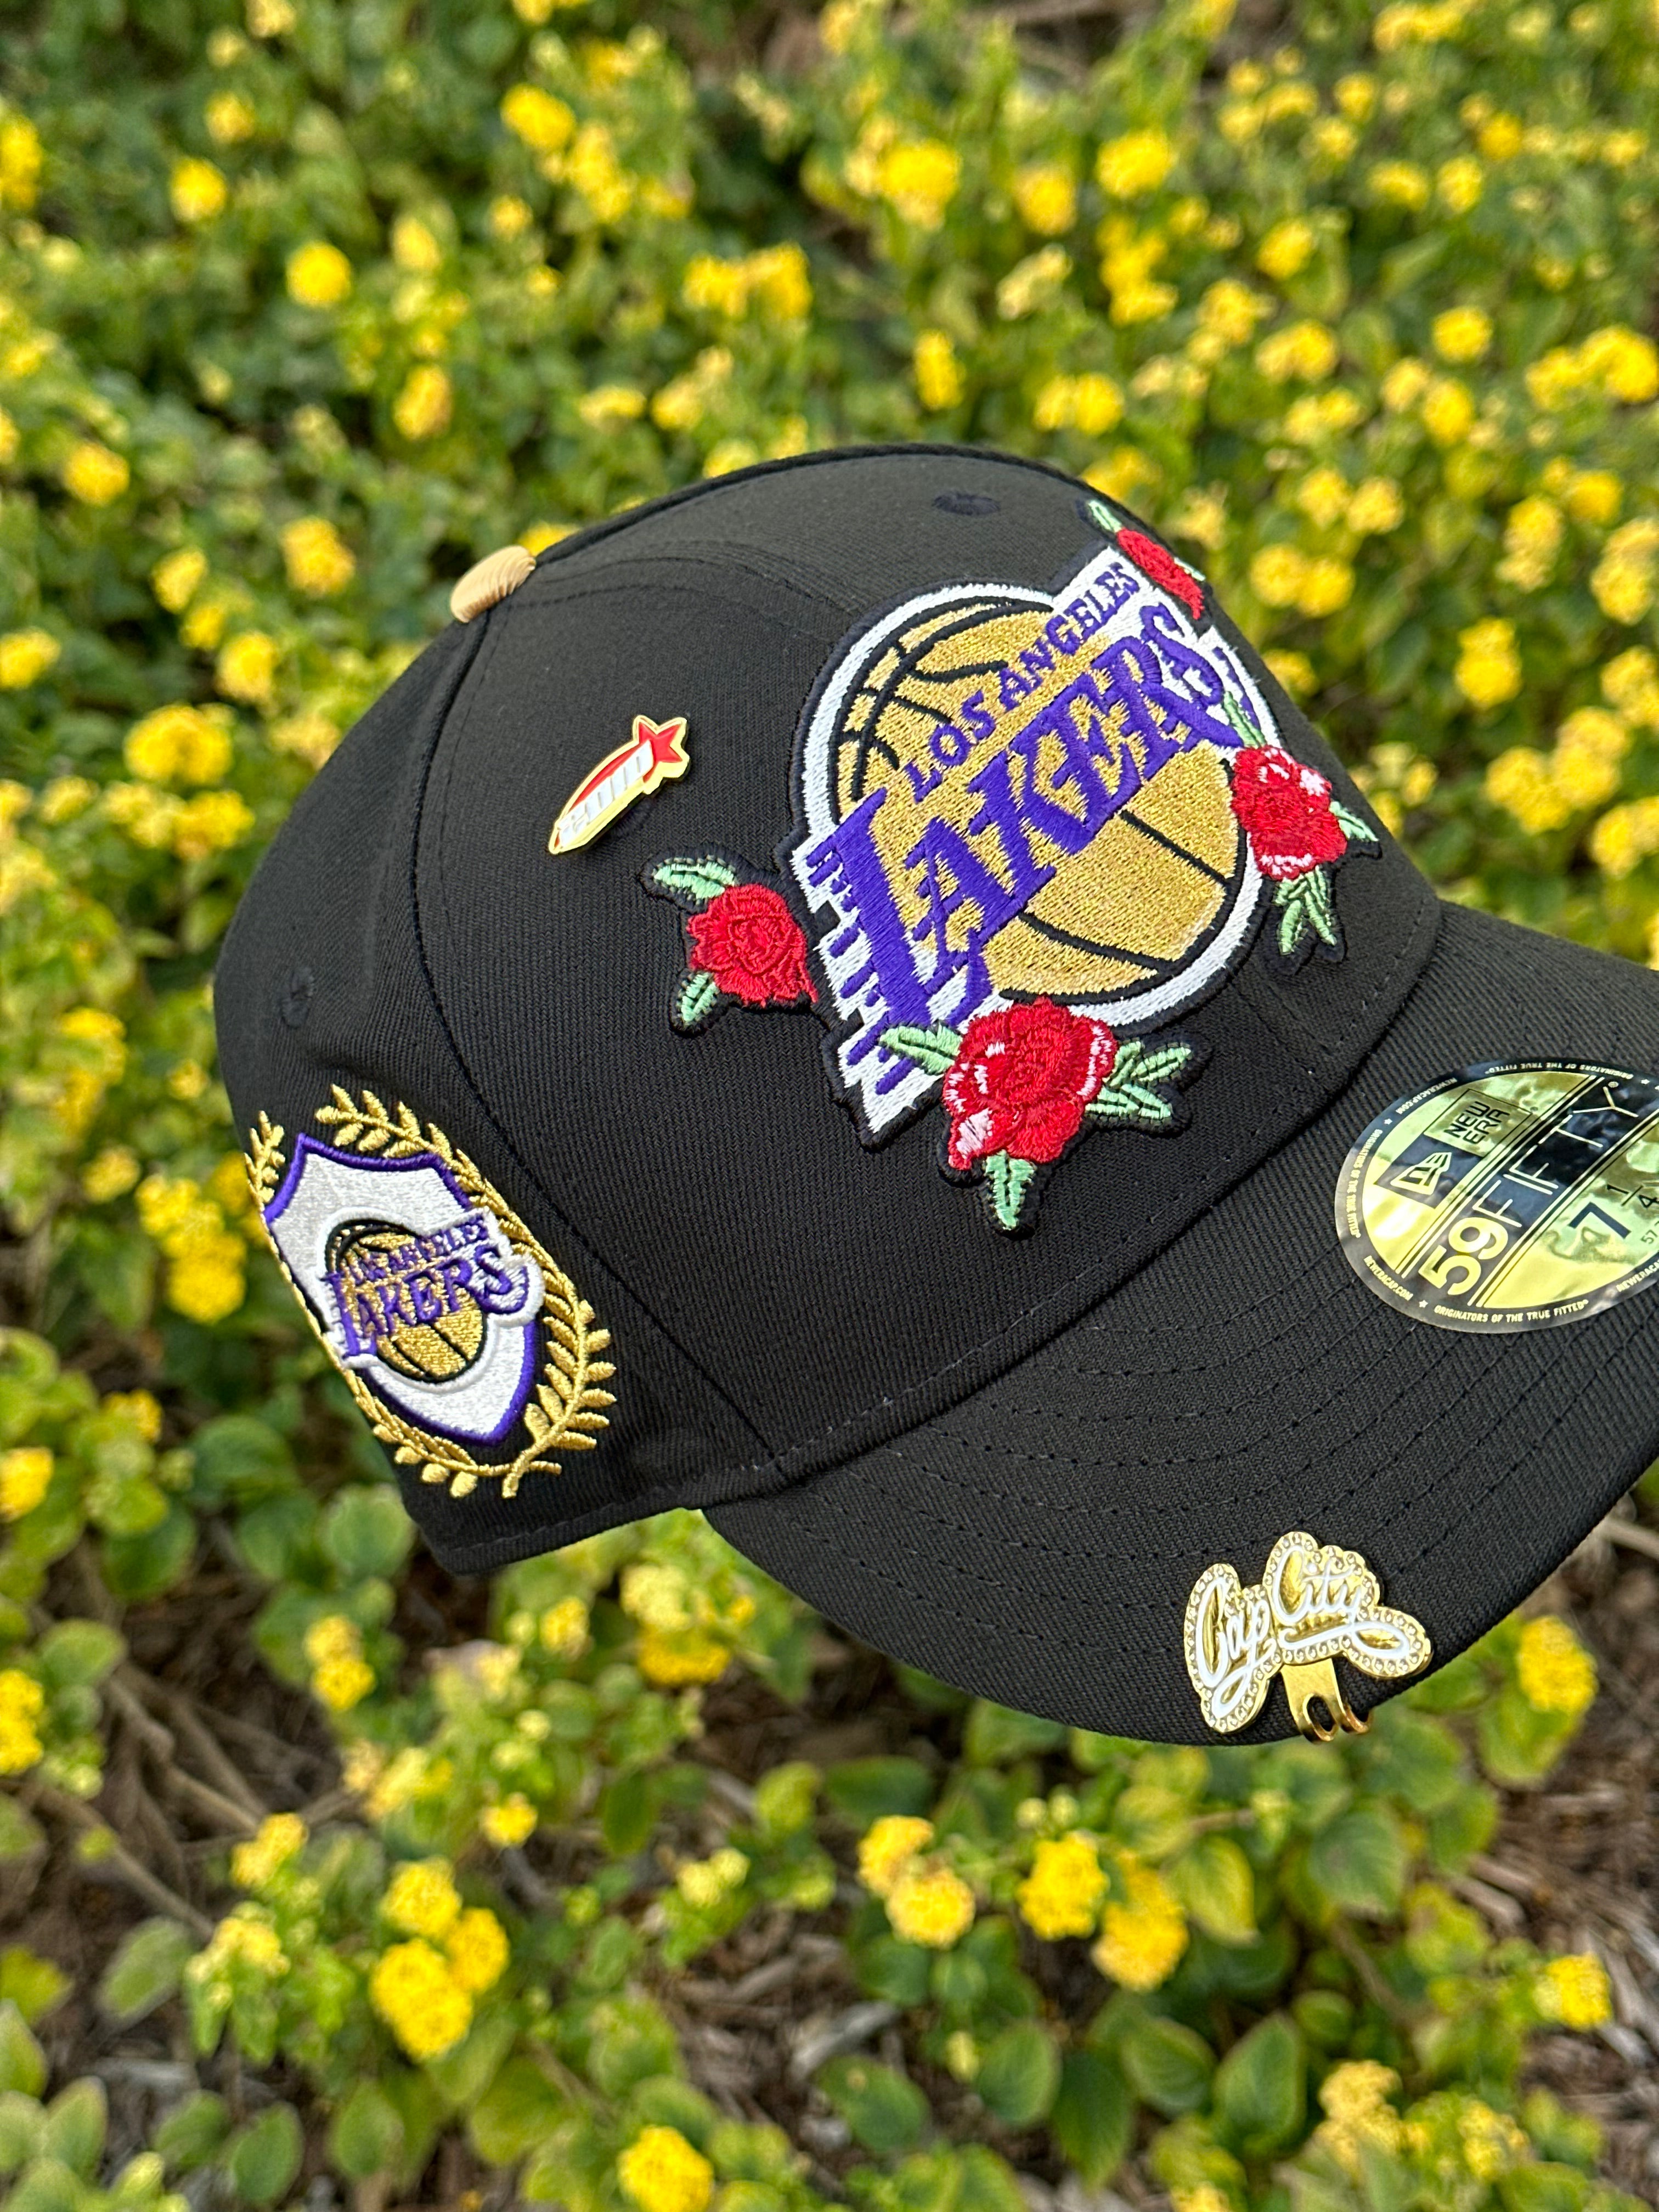 NEW ERA EXCLUSIVE 59FIFTY BLACK LOS ANGELES LAKERS W/ ROSES + LAKERS LOGO SIDE PATCH